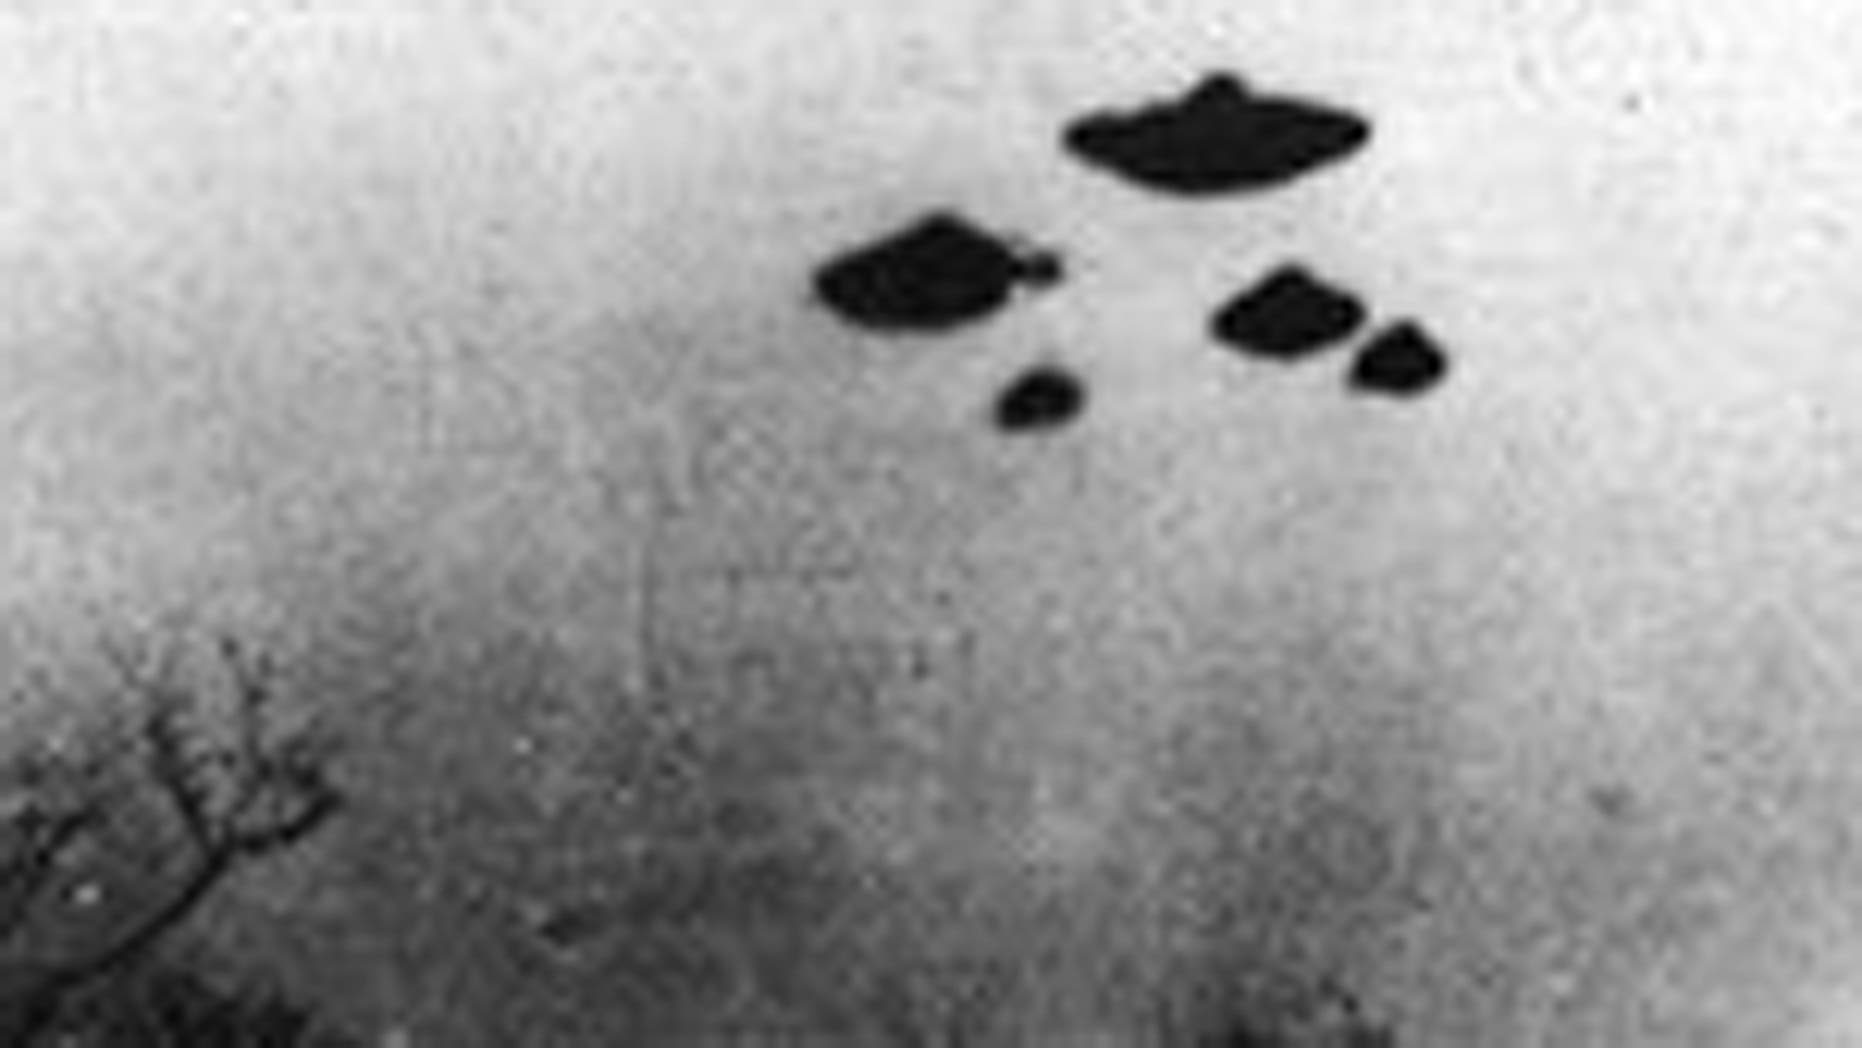 Archive photo - an "UFO" sighting & # 39; on Sheffield, United Kingdom, March 4, 1962 (CIA).